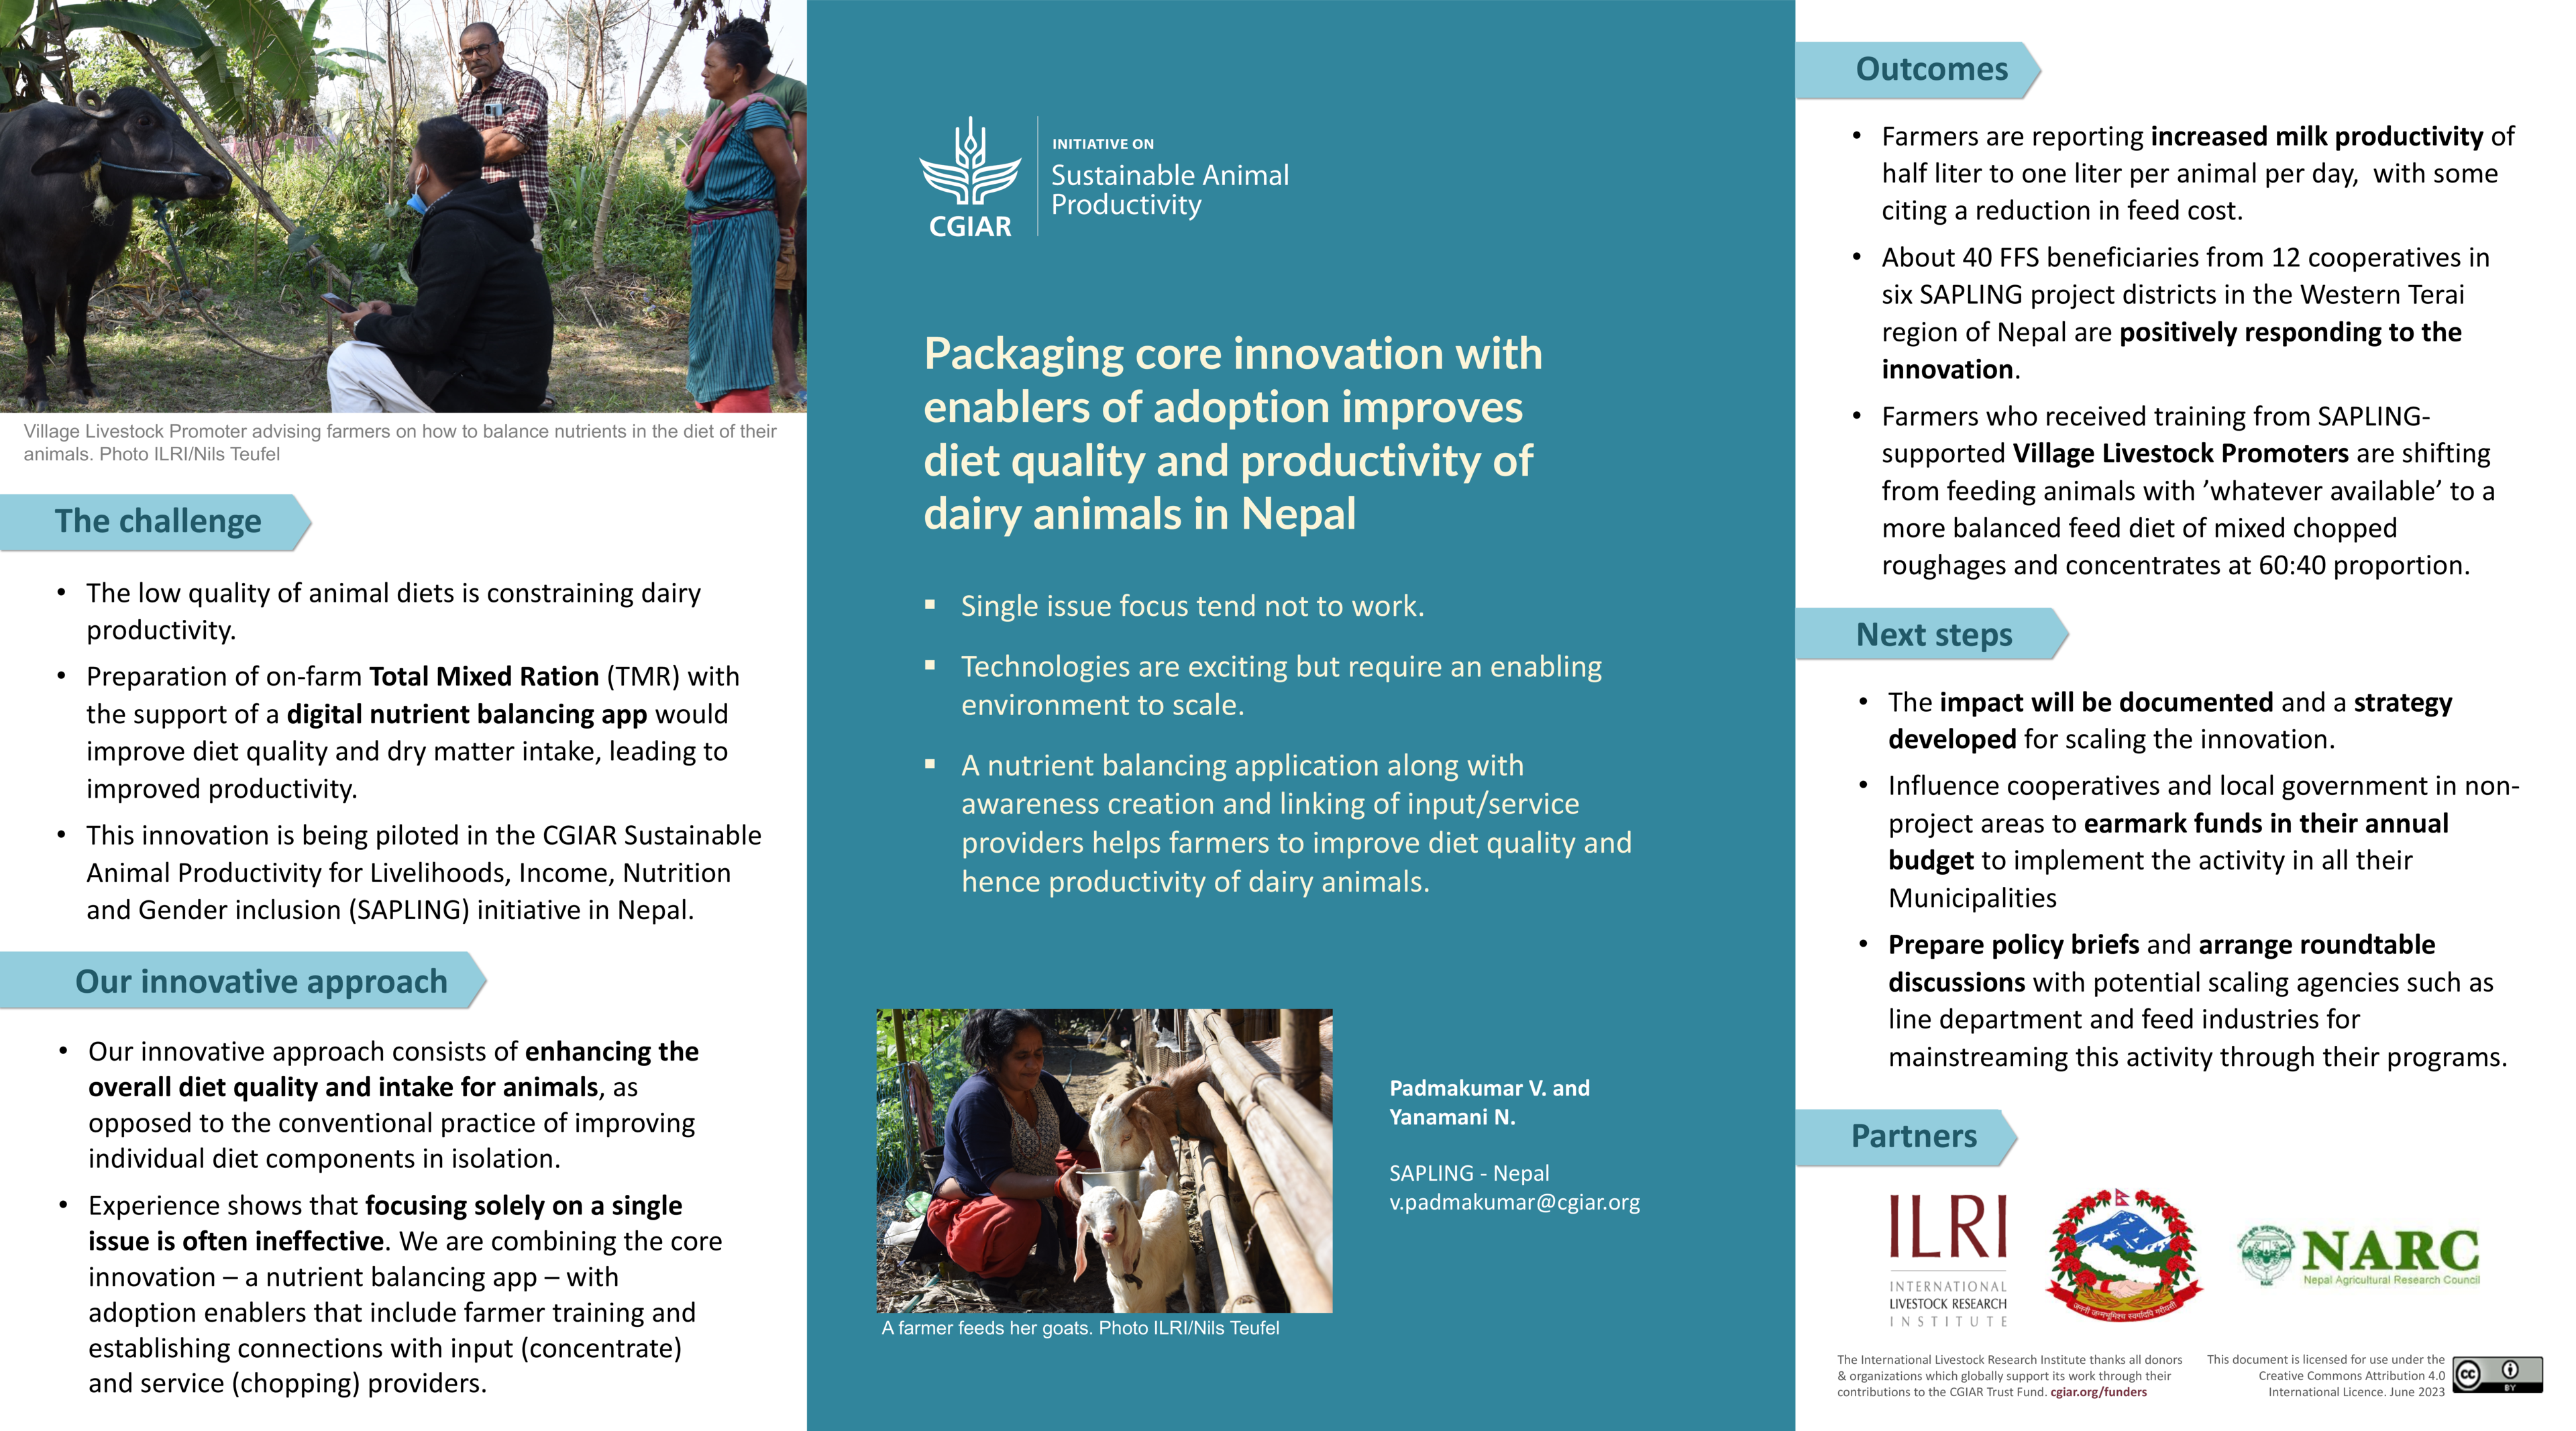 Packaging core innovation with enablers of adoption improves diet quality and productivity of dairy animals in Nepal